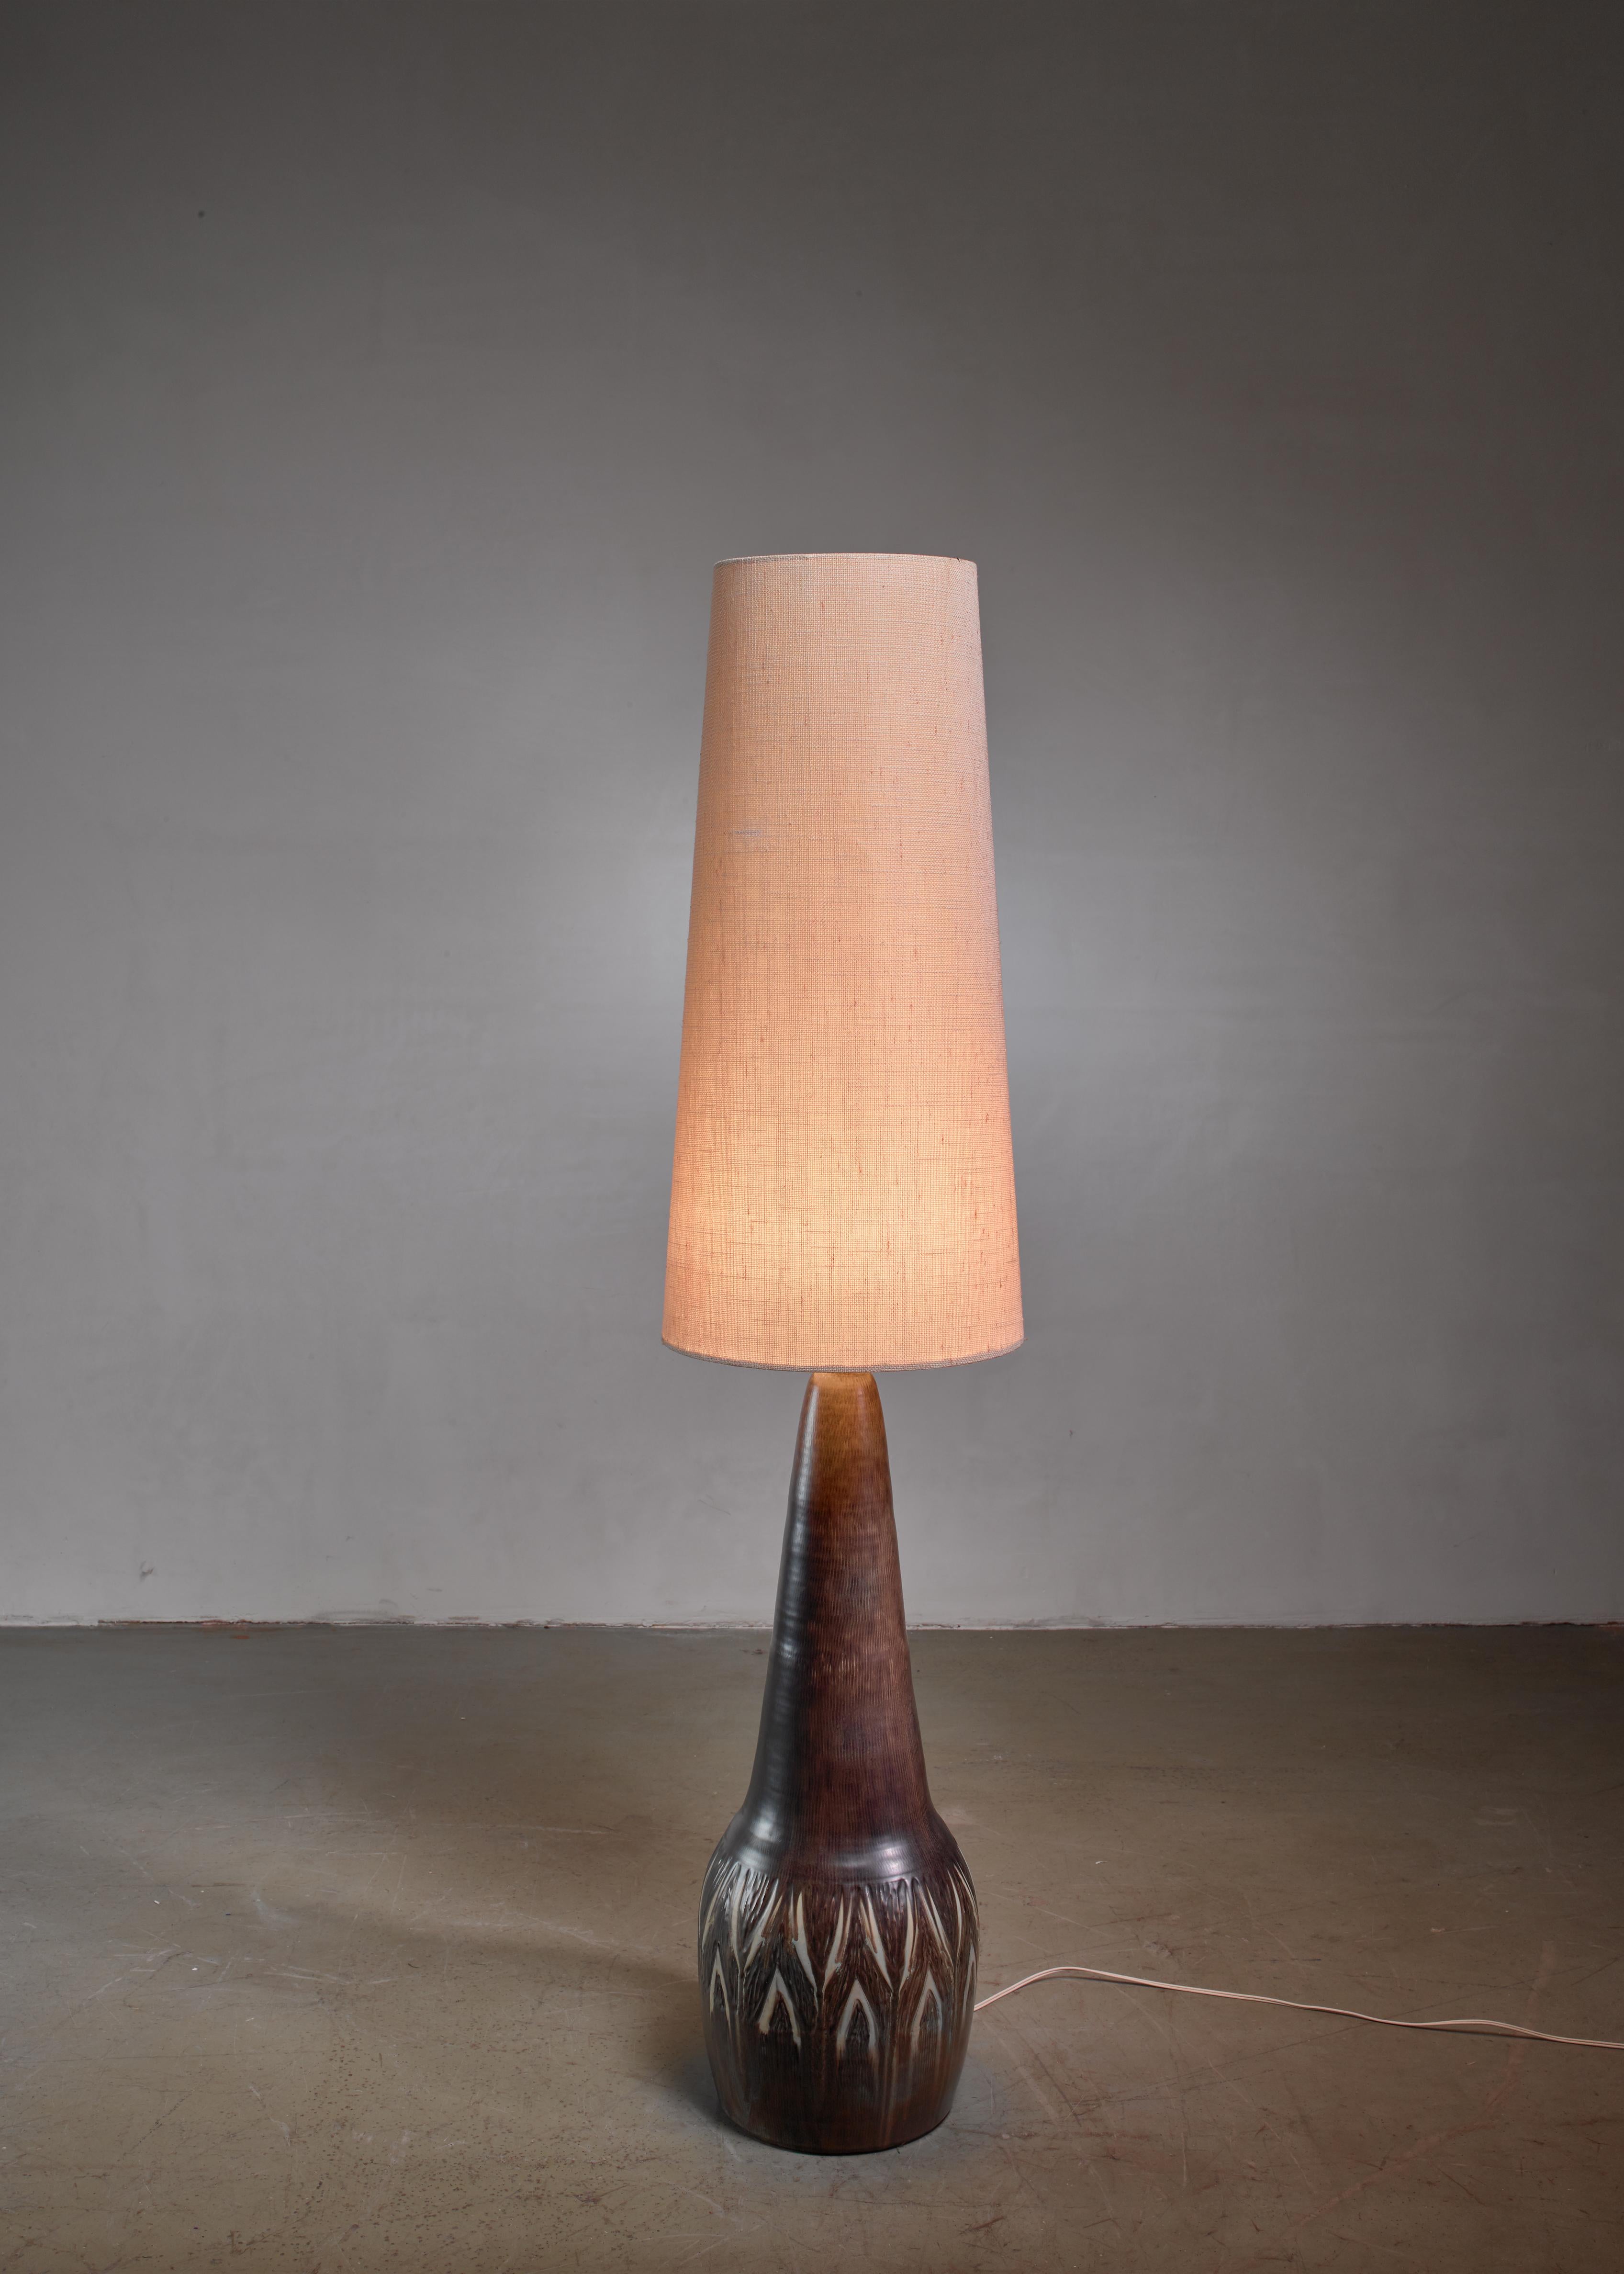 A large brown ceramic Løvemose floor lamp from Denmark. Marked by Løvemose and in an excellent condition.

The measurements stated are of the lamp without a shade. The shade is newly made, other dimensions are available upon request.